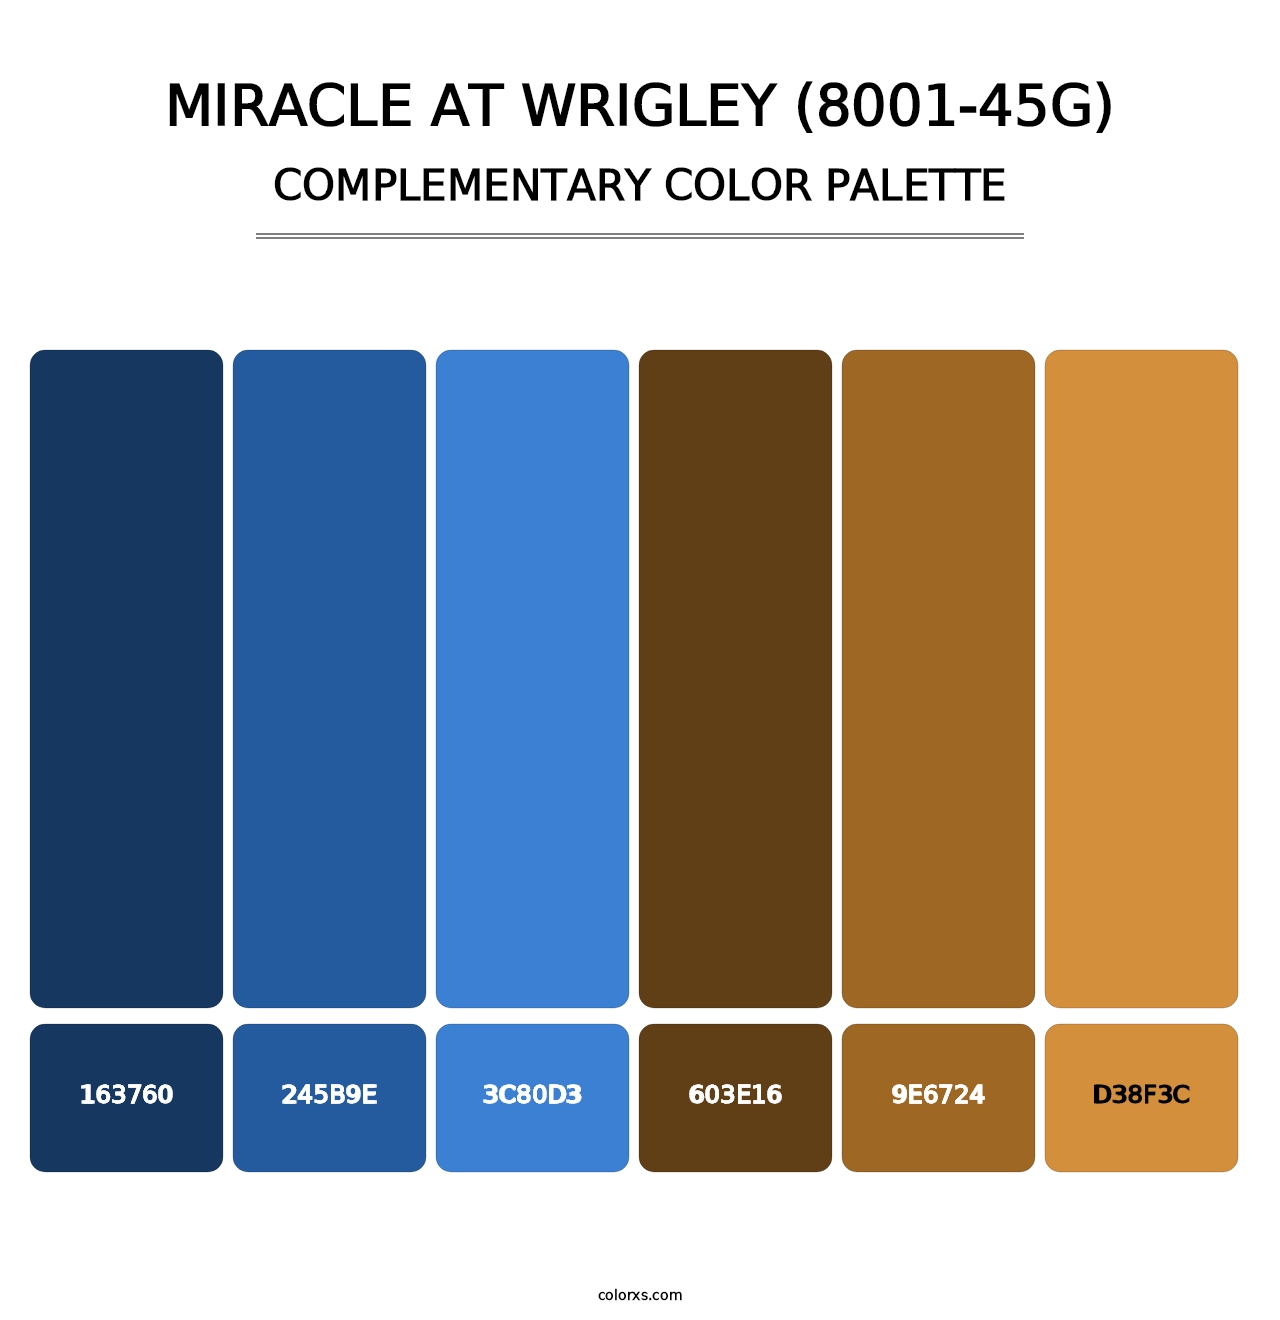 Miracle at Wrigley (8001-45G) - Complementary Color Palette